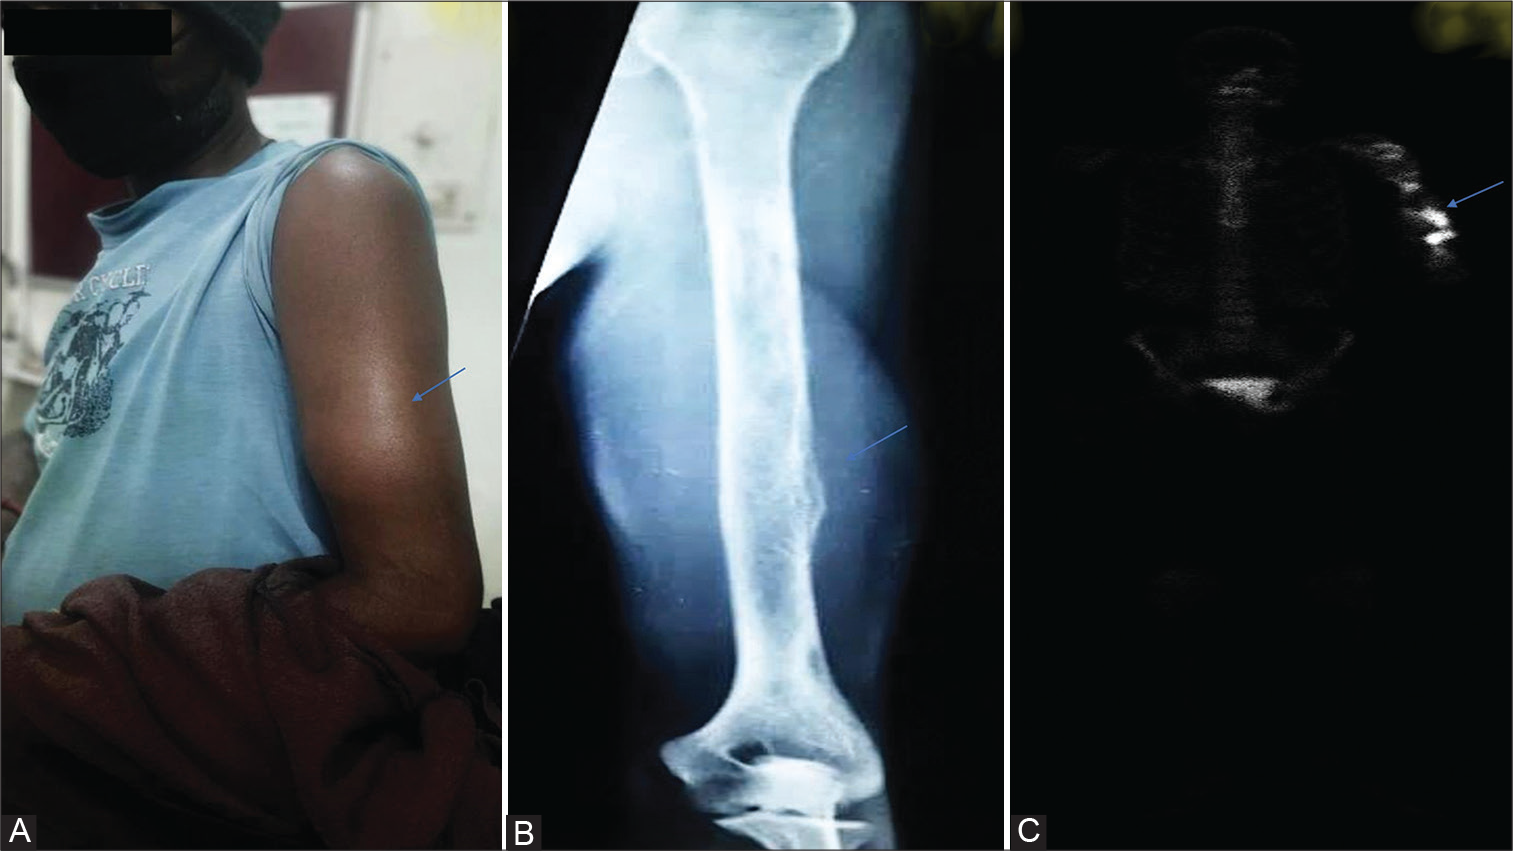 (A) Clinical photograph of the patient. (B) X-ray of the left arm. (C) Fluorodeoxyglucose positron emission tomography-computed tomography whole body imaging.